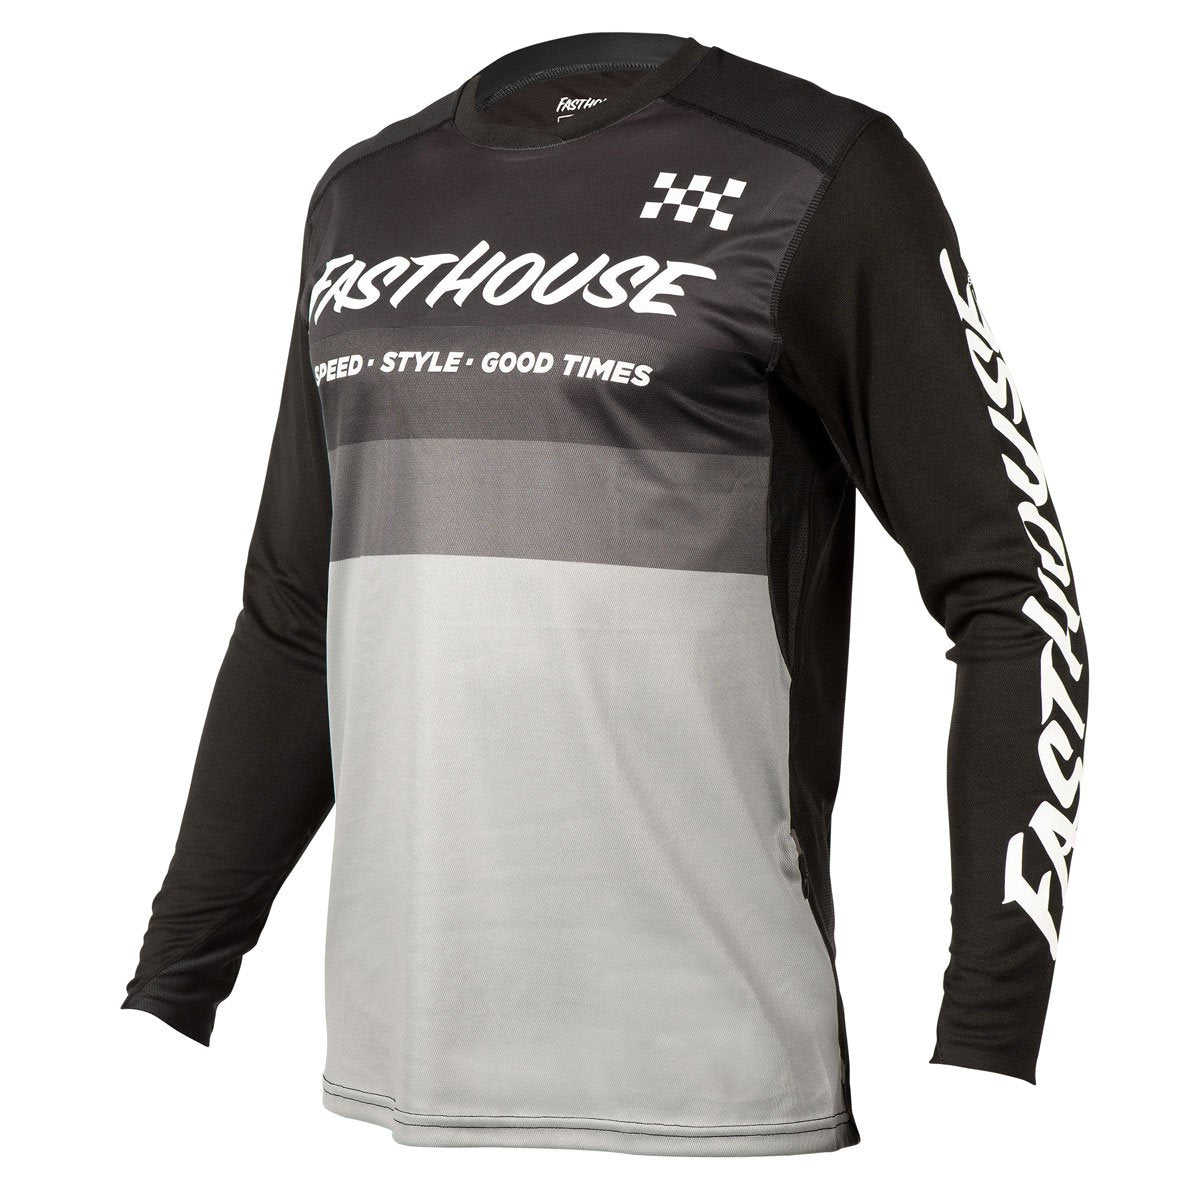 Jersey FastHouse Alloy Kilo LS